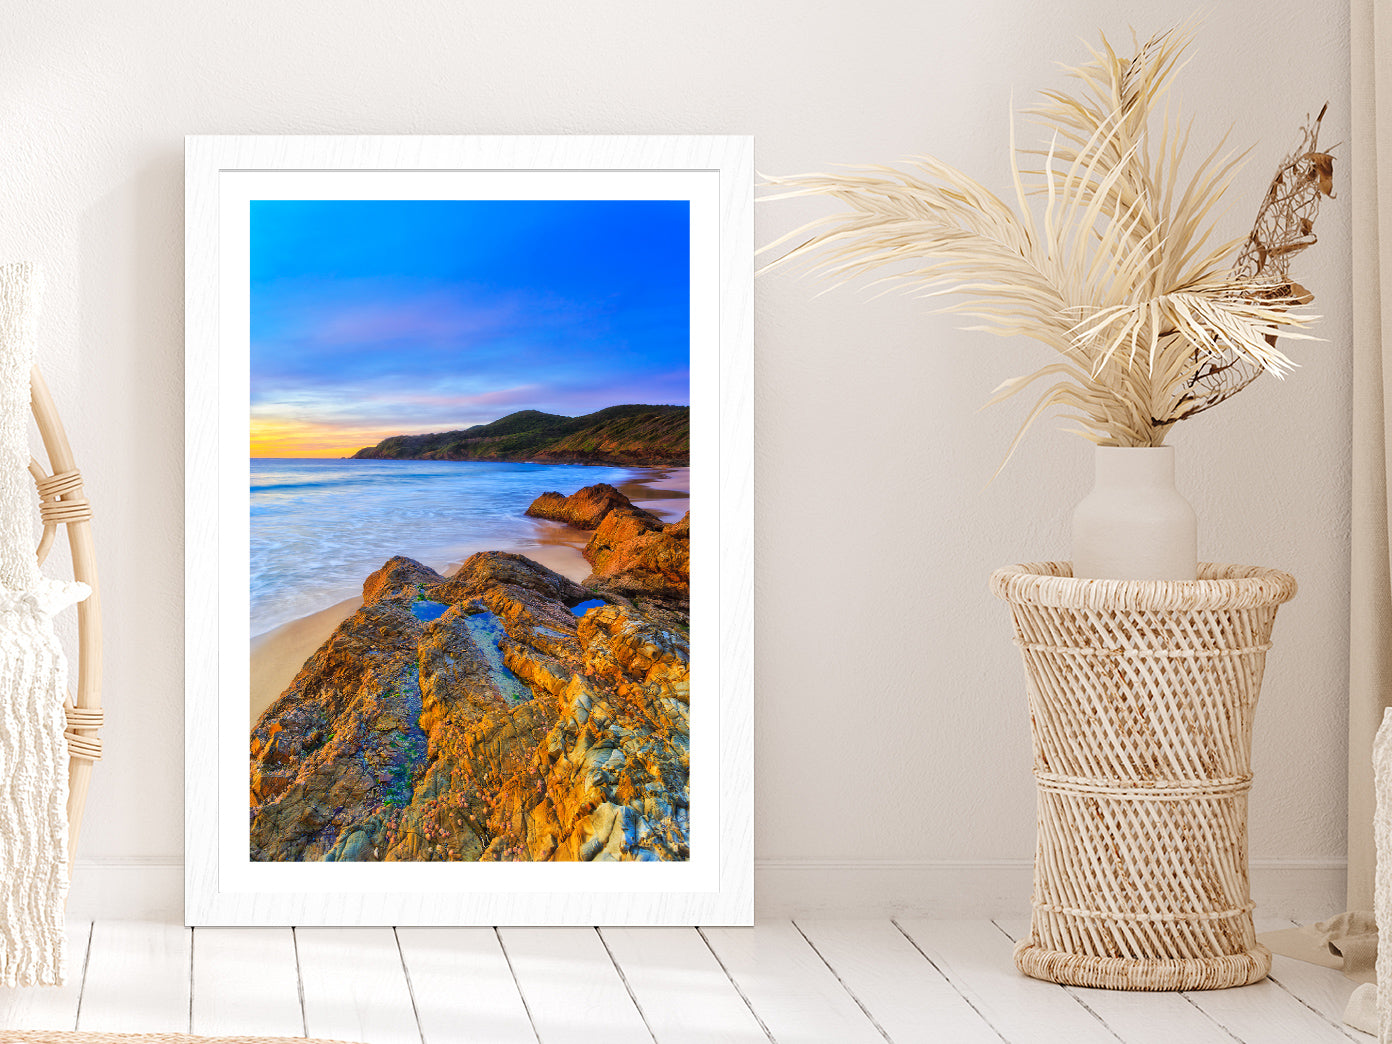 Seascape Sunrise At Burgess Beach Glass Framed Wall Art, Ready to Hang Quality Print With White Border White